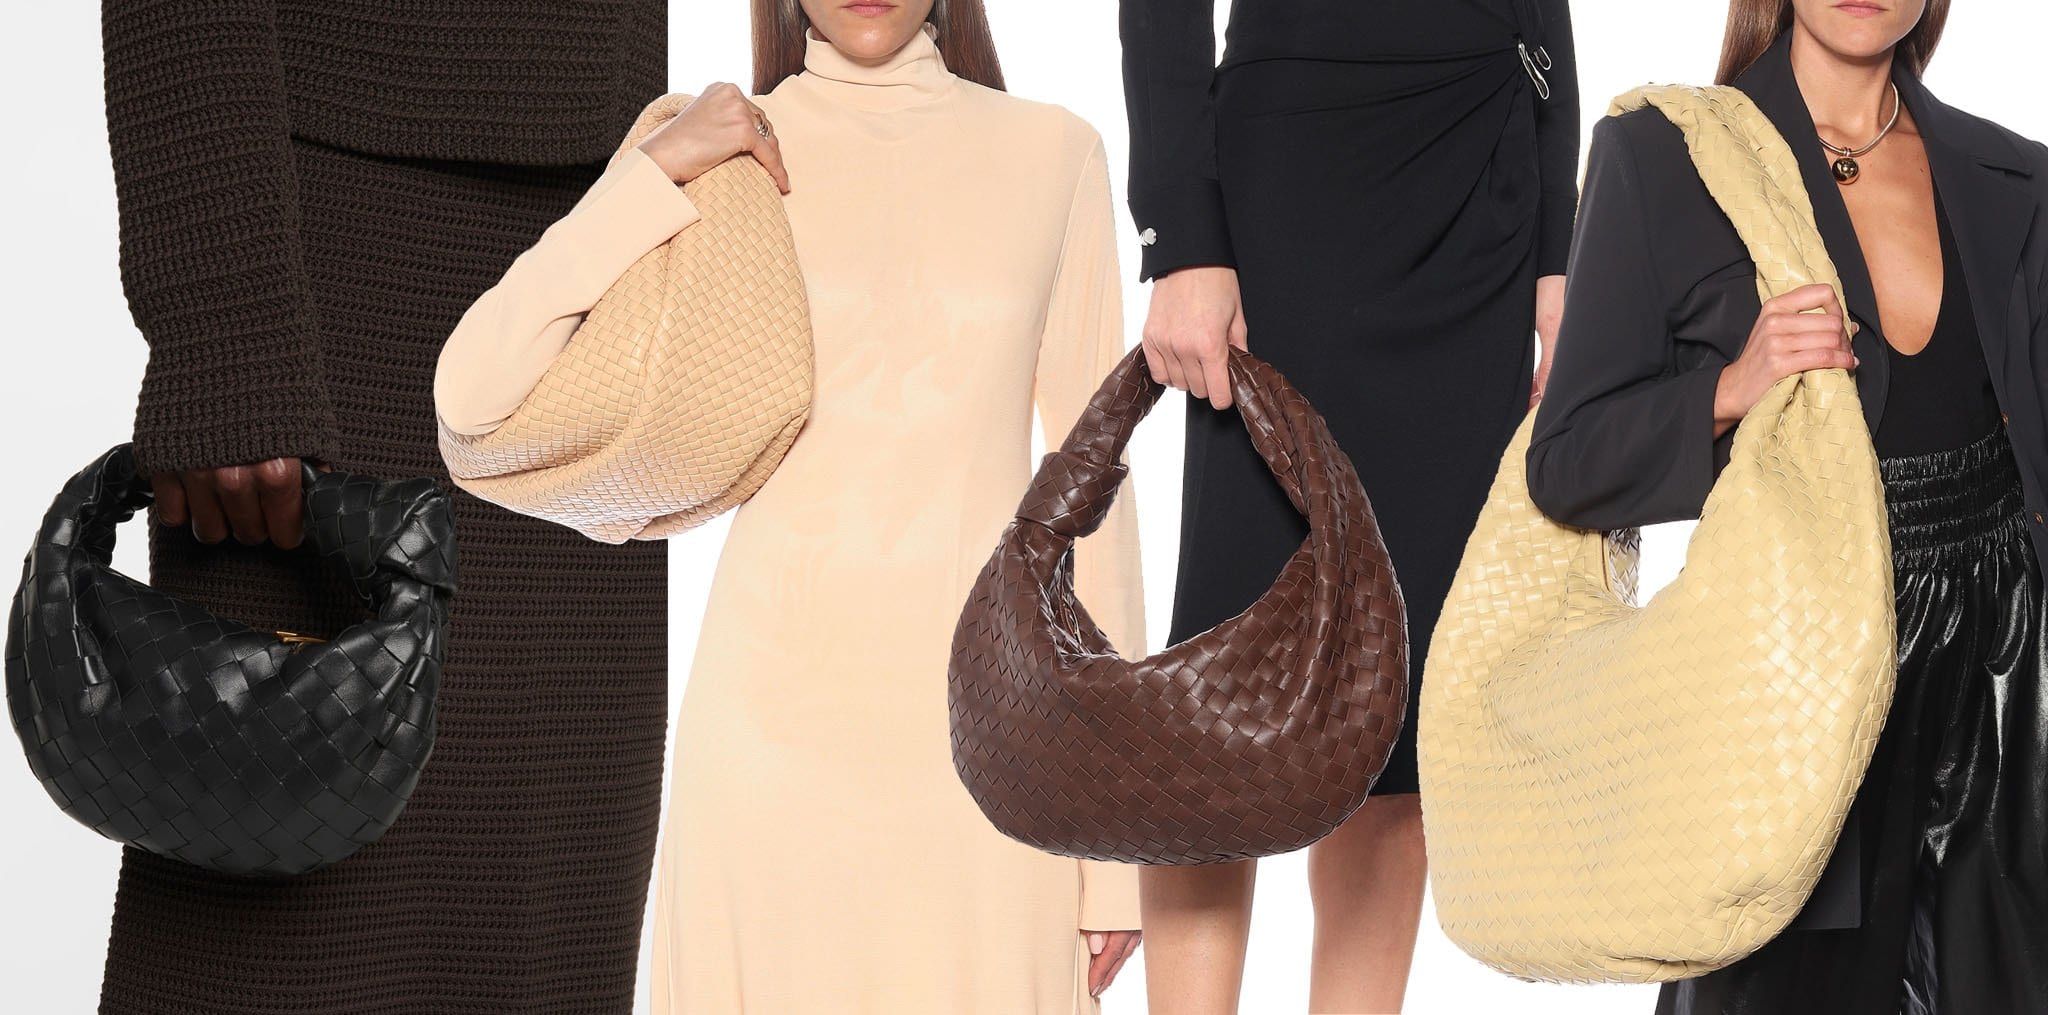 Featuring the fashion house's Intrecciato weaving, the Jodie bag is characterized by the hobo-inspired curved silhouette and the knotted detail at the handle